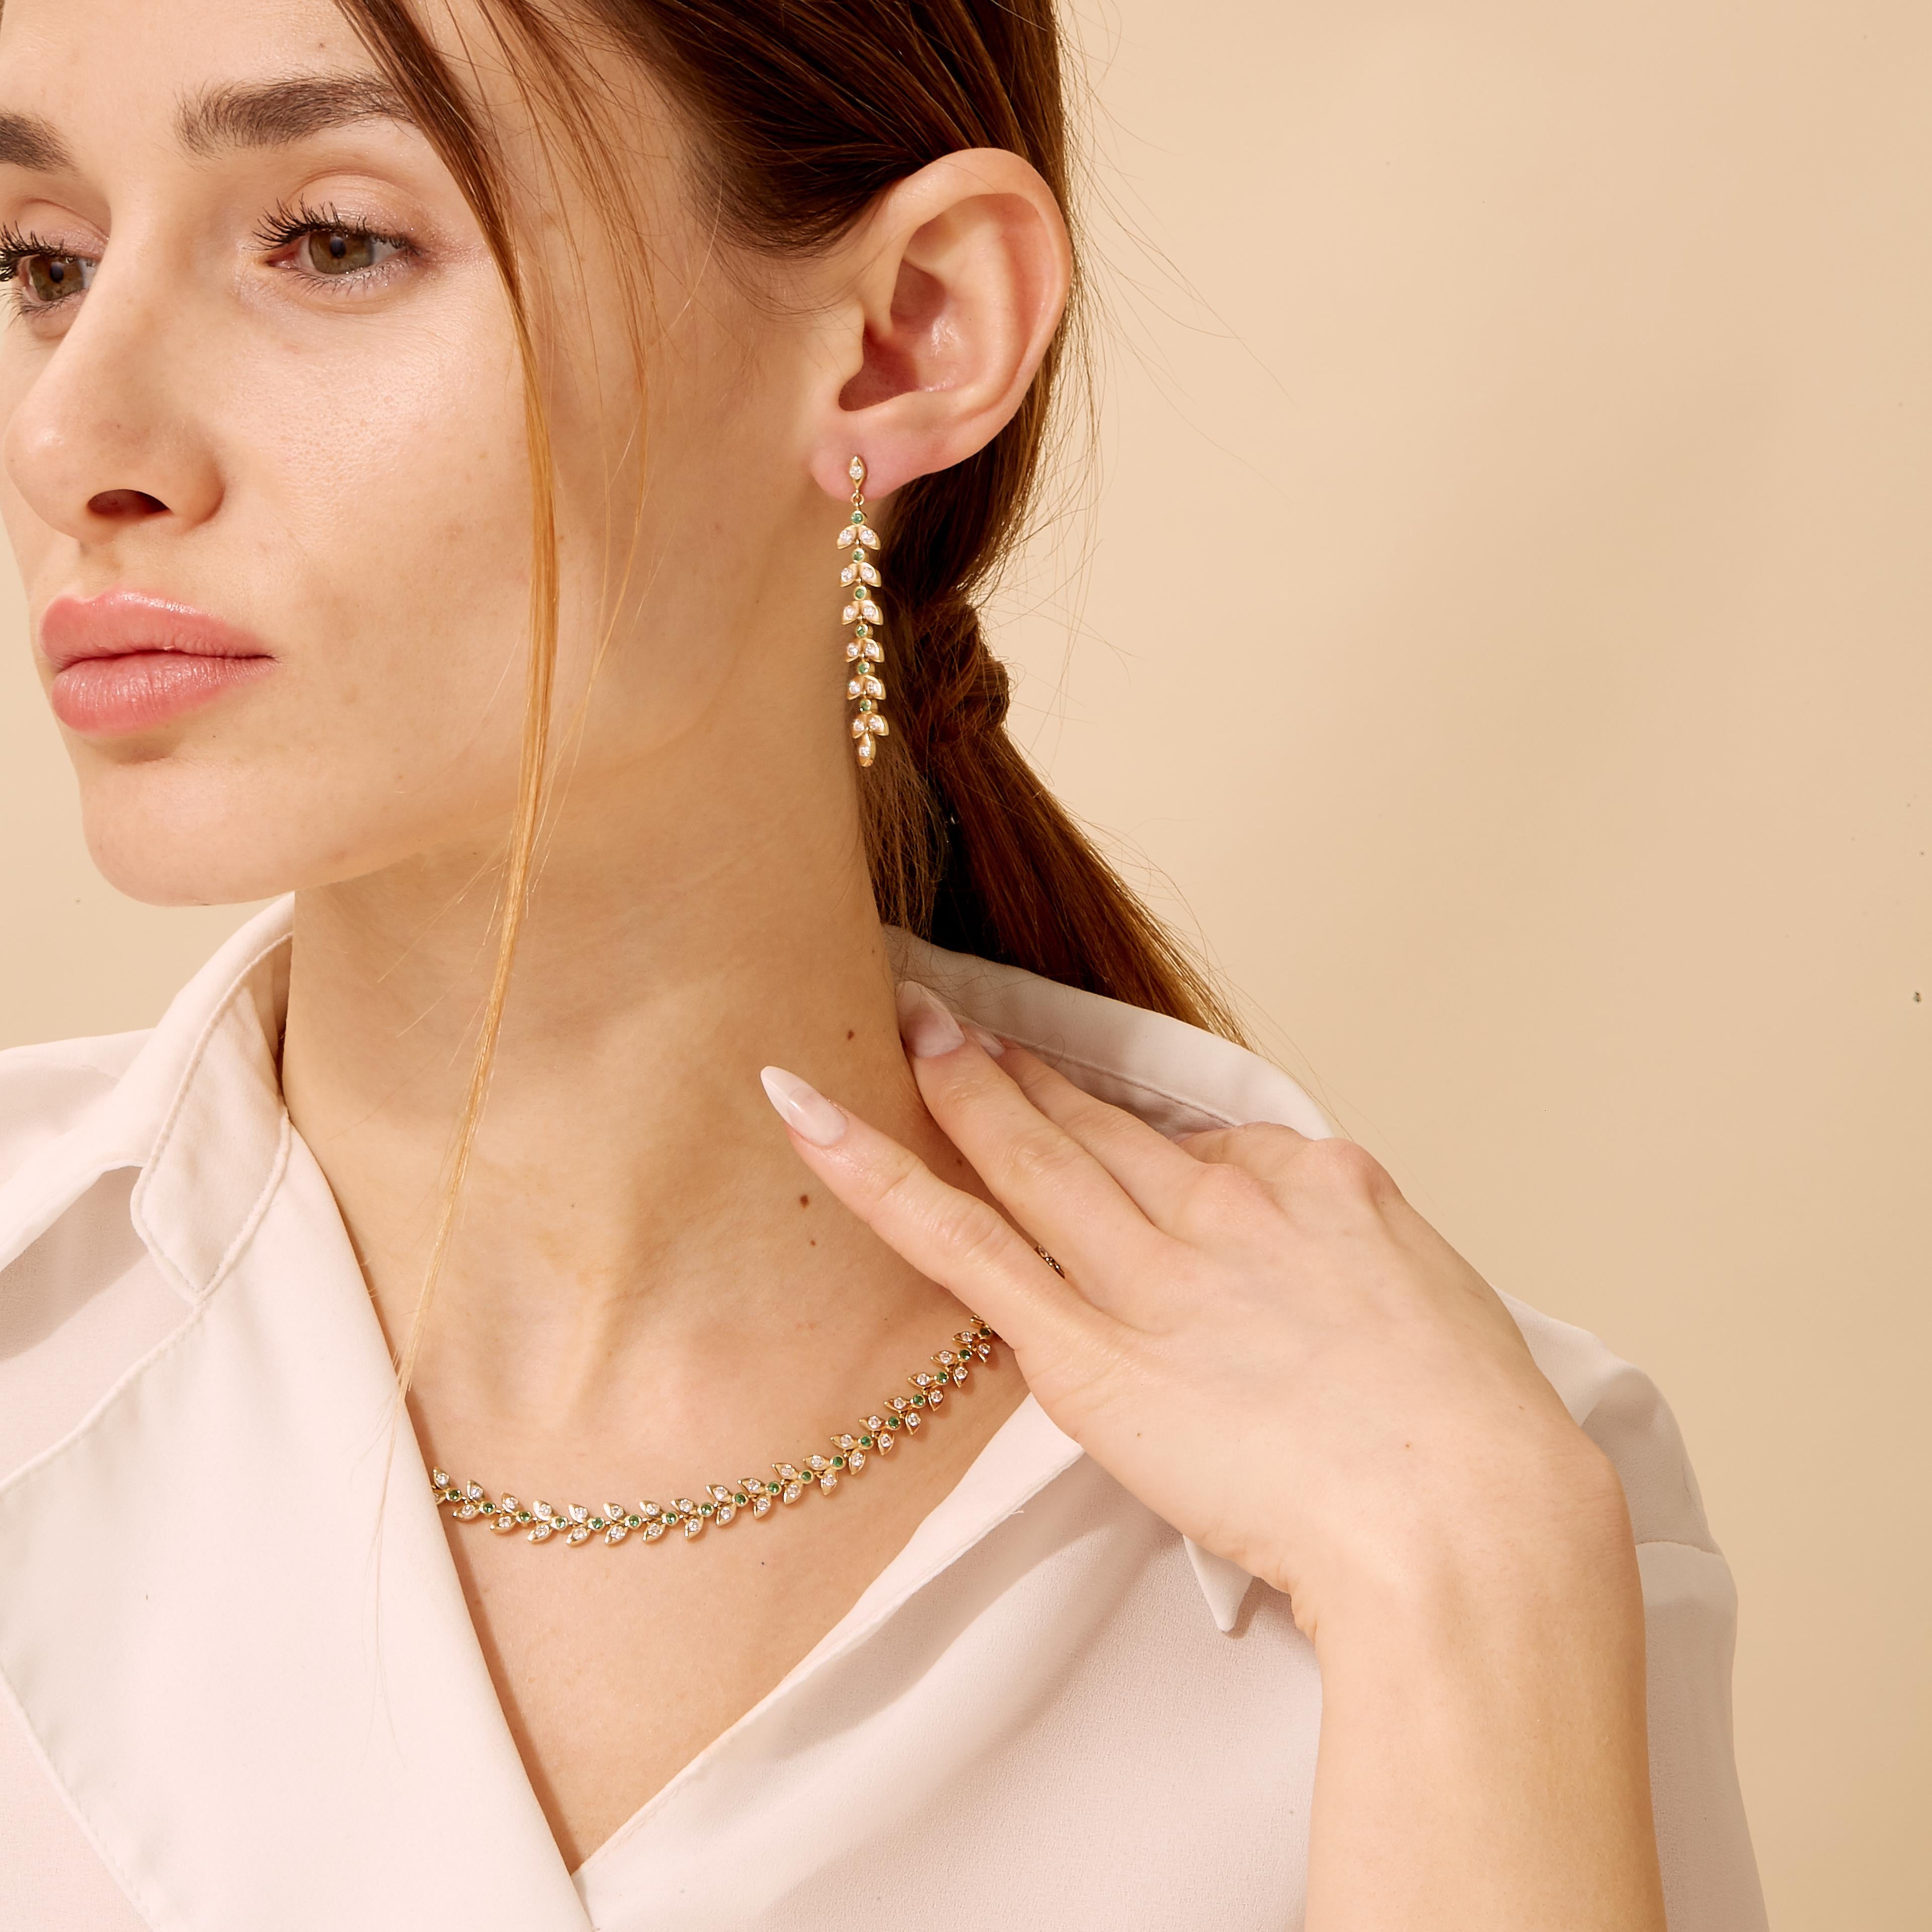 Created in 18 karat yellow gold
Emeralds 0.28 carat approx.
Champagne diamonds 1 carat approx.
Post backs for pierced ears
Limited Edition

About the Designers

Drawing inspiration from little things, Dharmesh & Namrata Kothari have created an